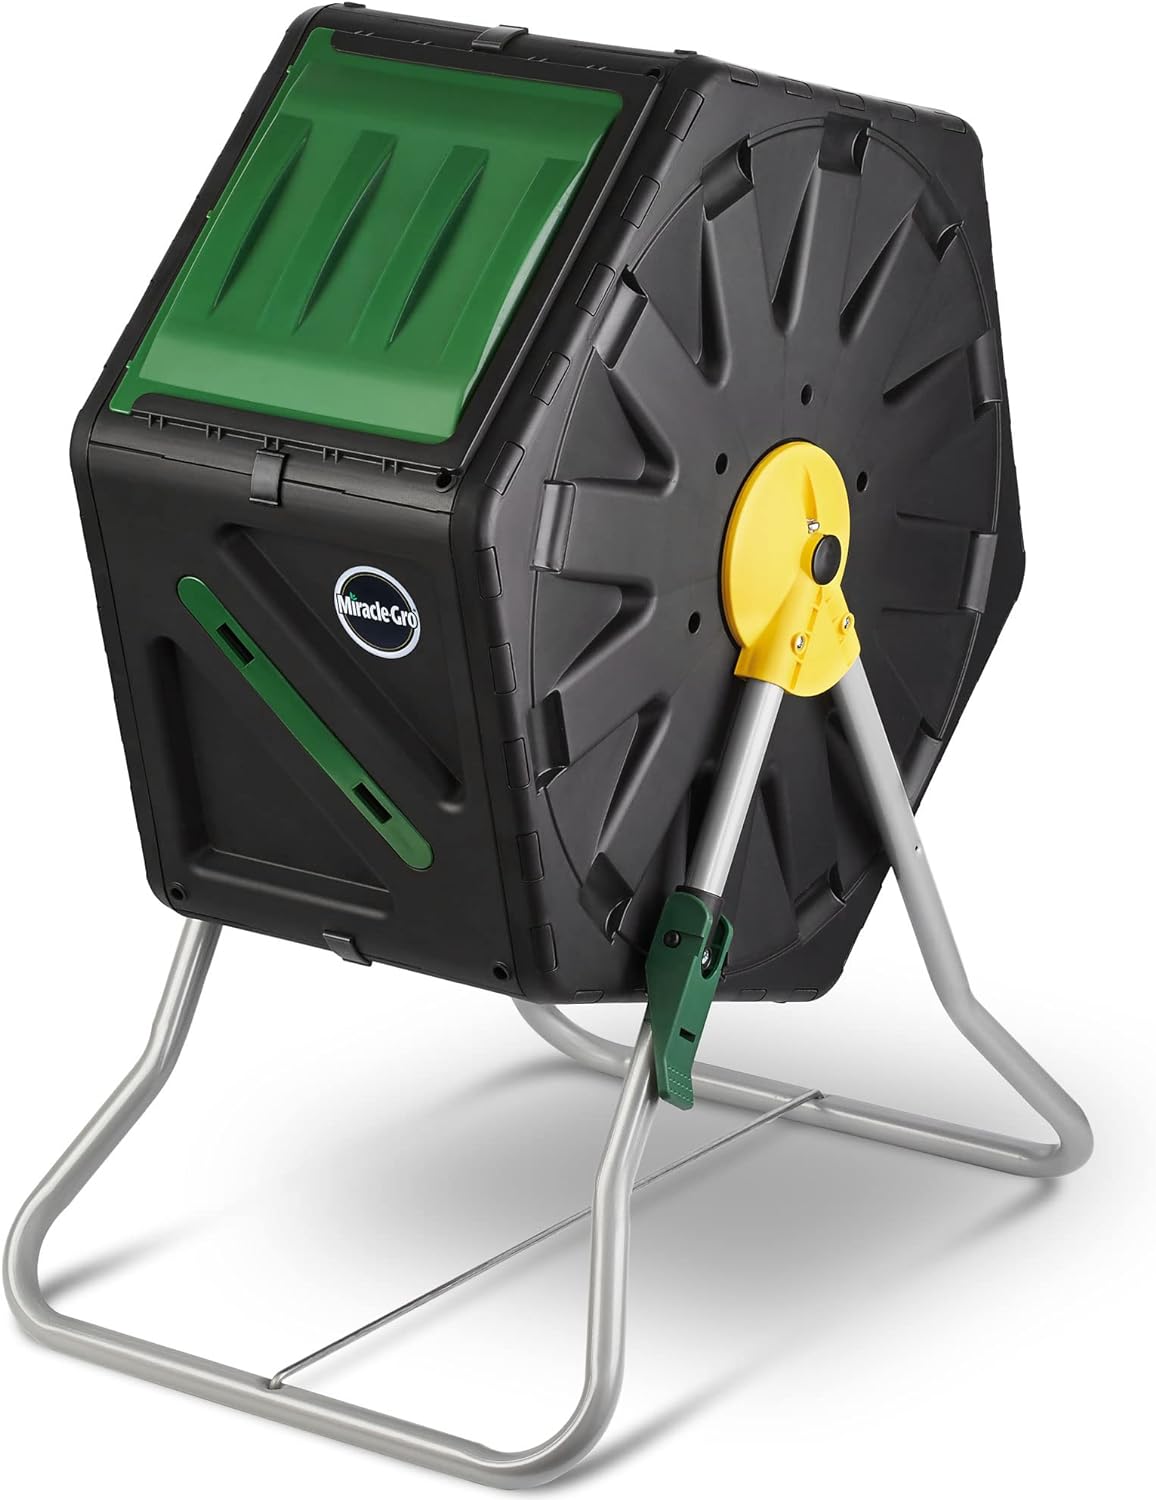 Miracle-Gro Small Composter - Compact Single Chamber Outdoor Garden Compost Bin Heavy Duty \u2013 UV Protected Turning Barrel Tumbling Composter (18.5 gallons)